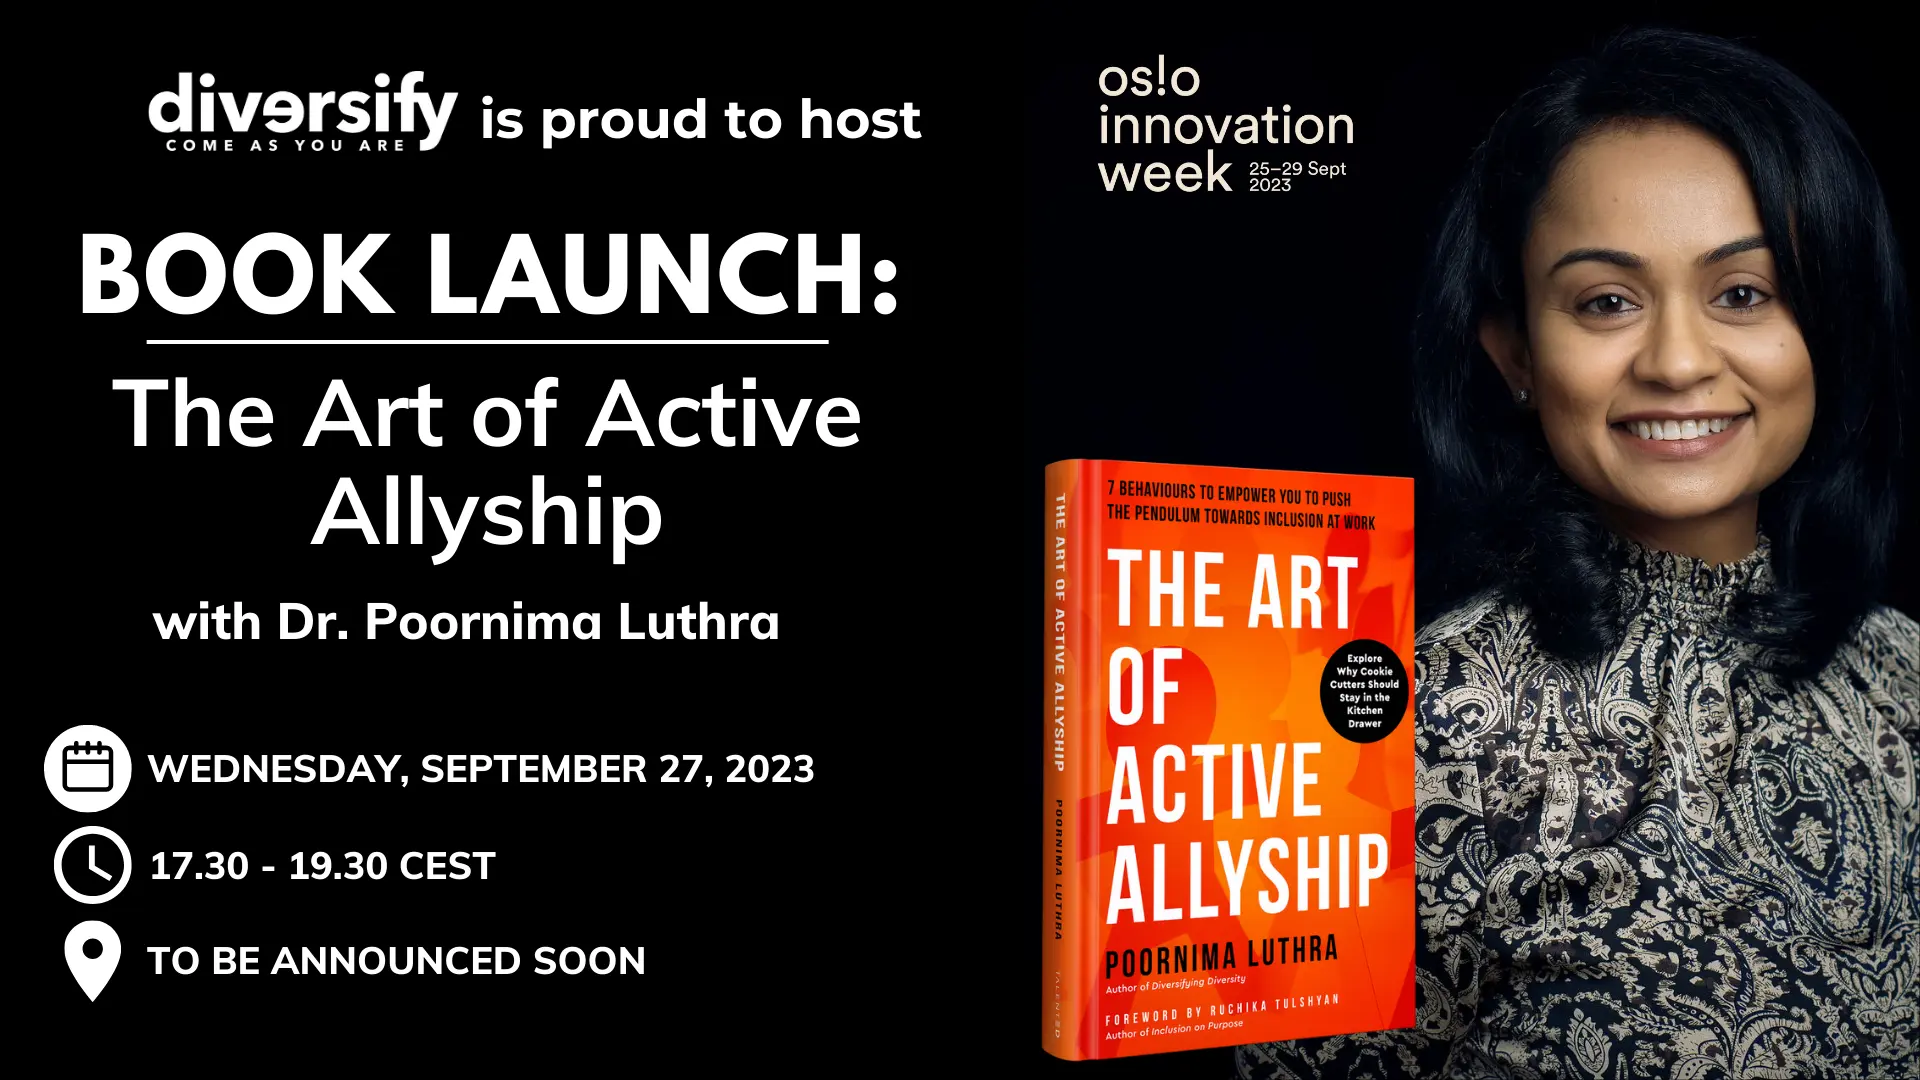 Book Launch- The Art of Active Allyship event poster